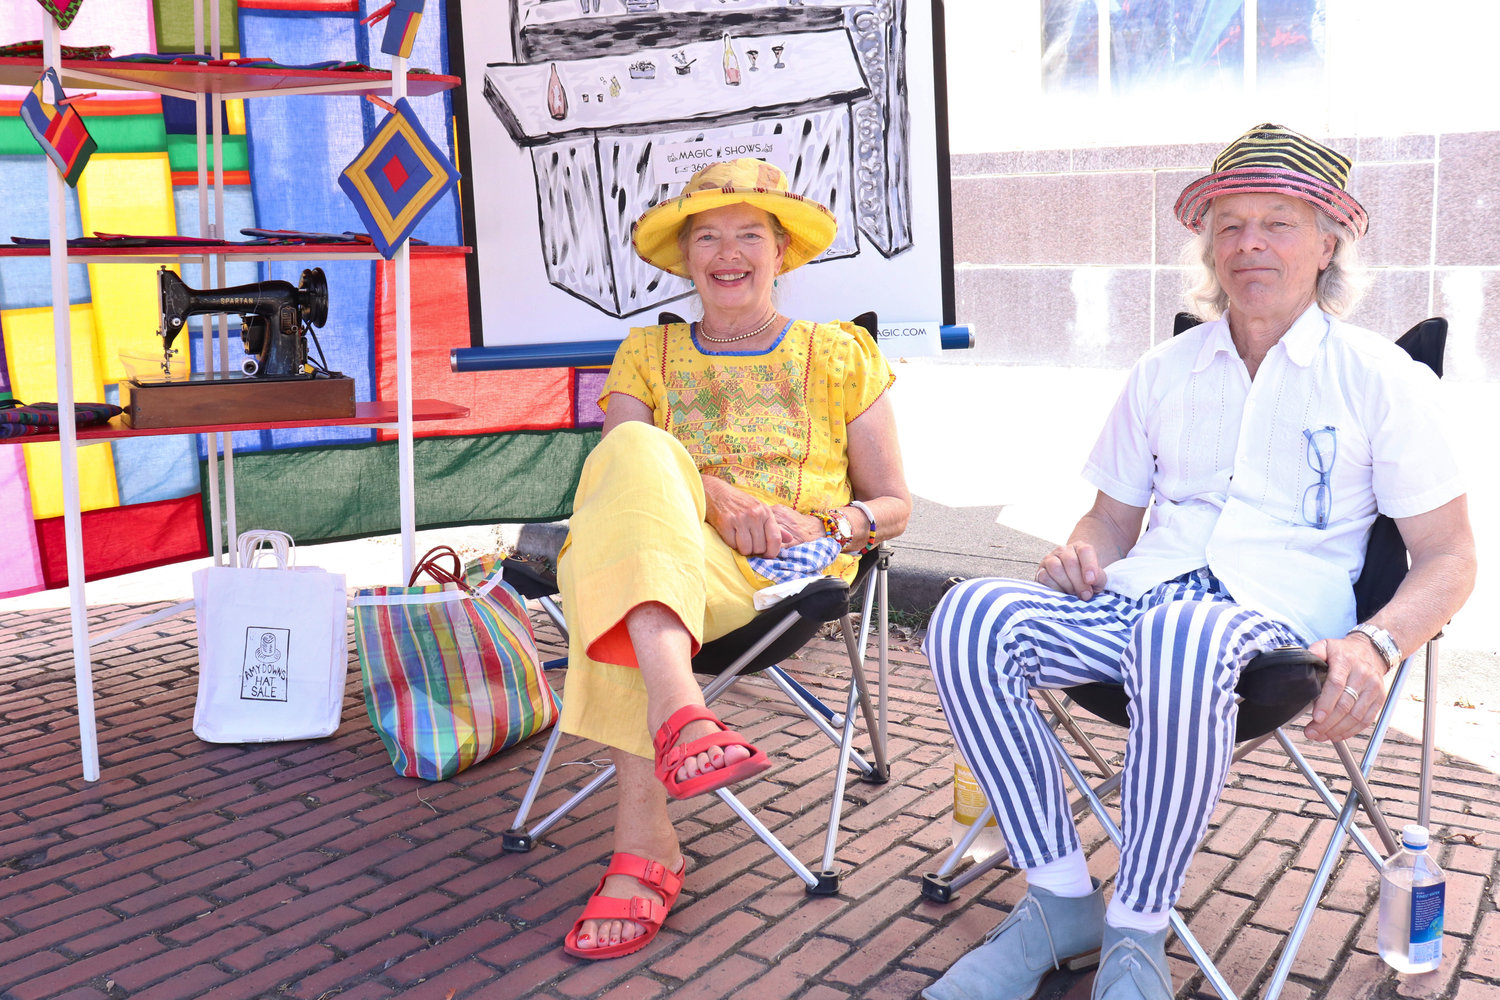 Hatmaker Amy Downs and magician G. Sparks cool off in the shade of their joint tent, Hat Magic, at Antique Fest in downtown Centralia on Sunday.